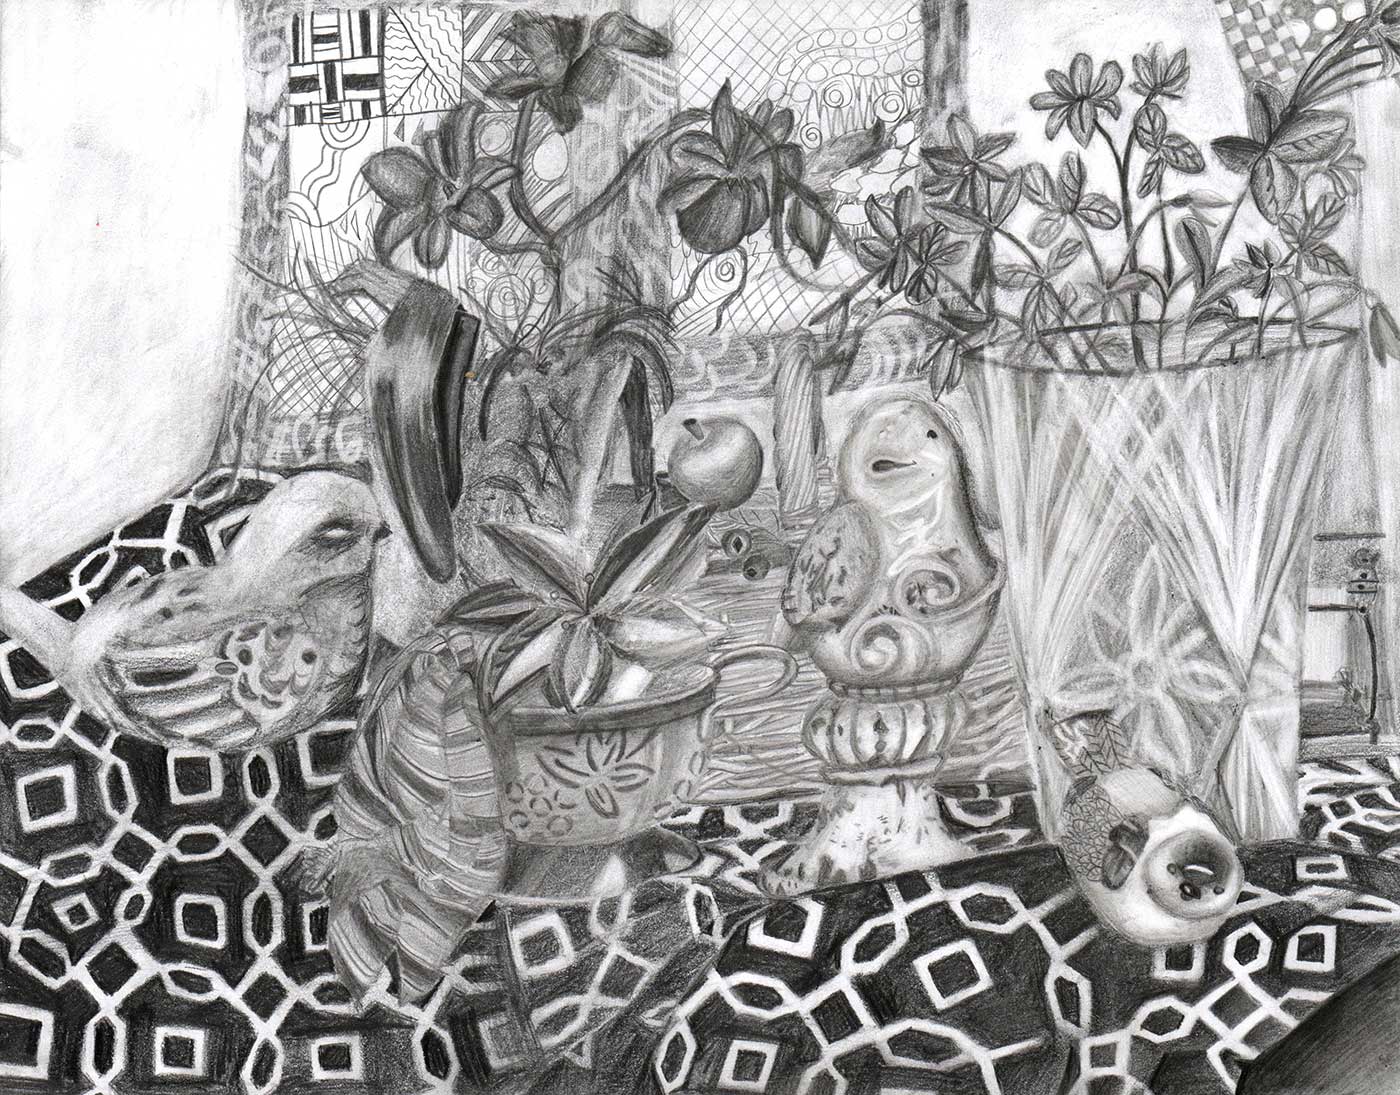 pencil drawing of plants, a bird, and small items over a patterned cloth.